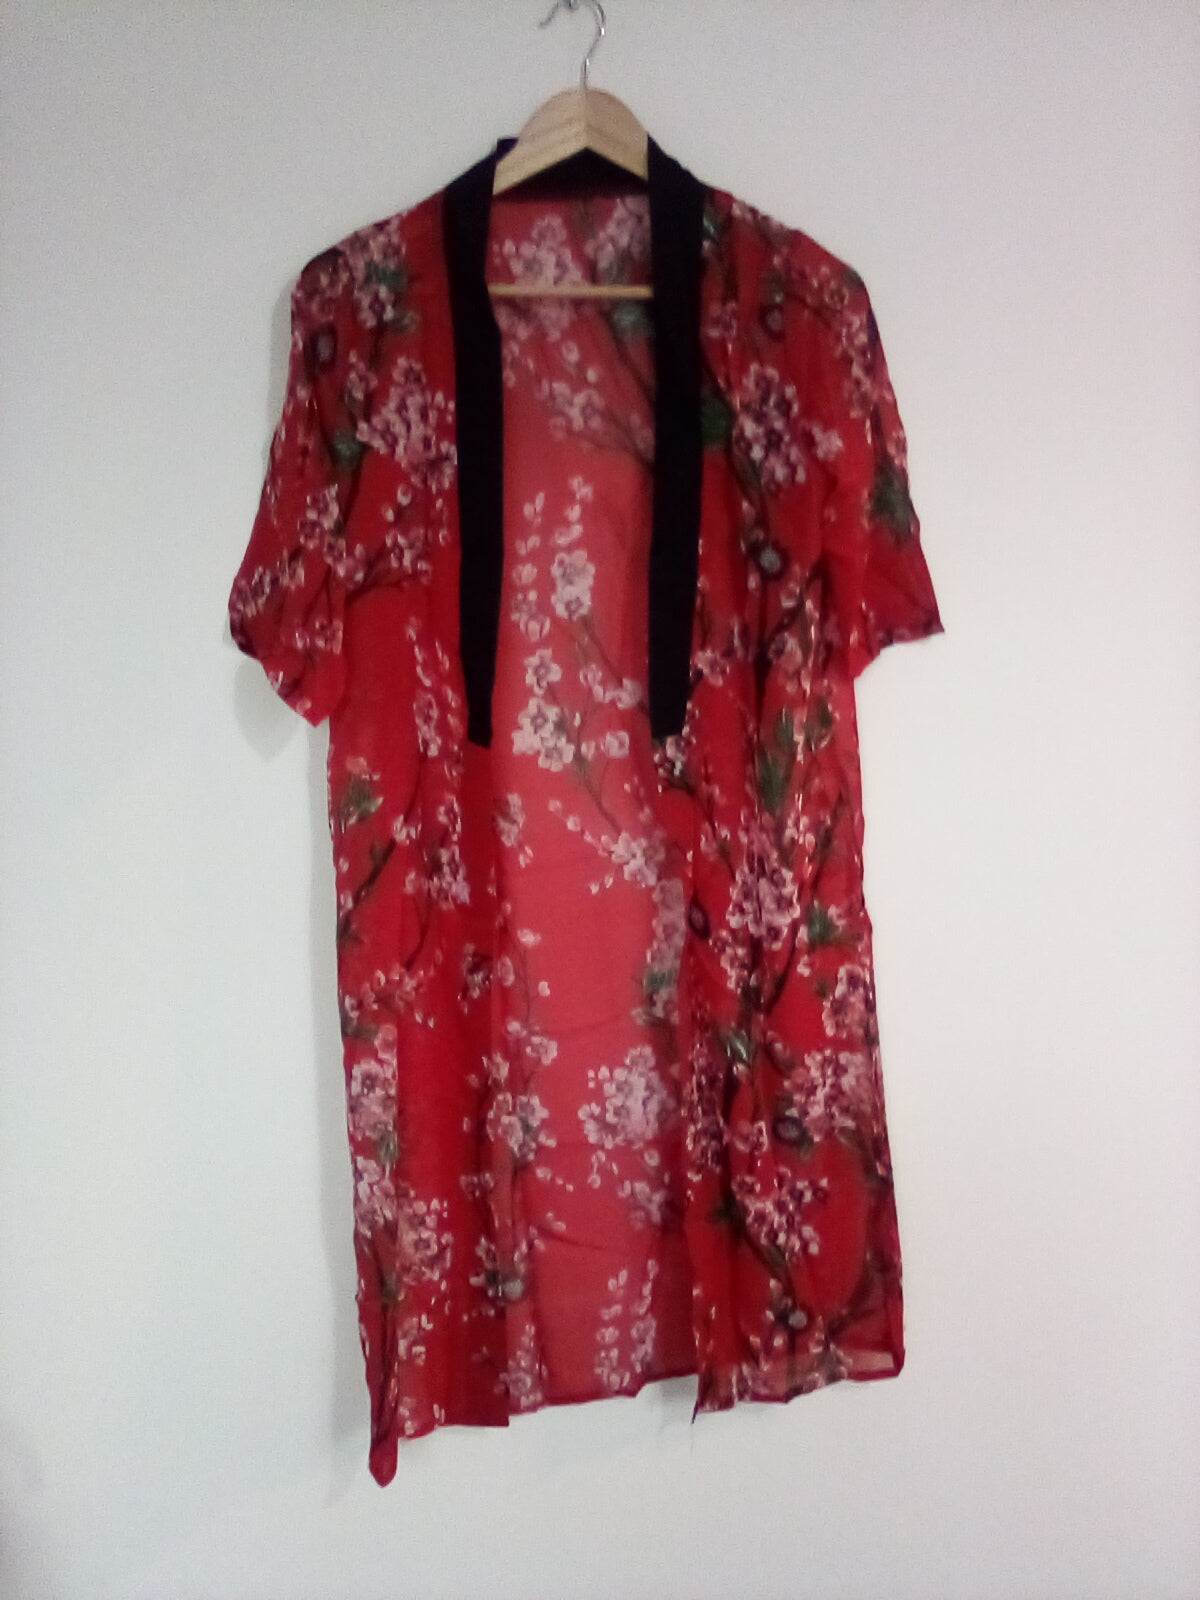 WOMENS SMALL RED/ FLORAL KIMANO/ DRESSING GOWN